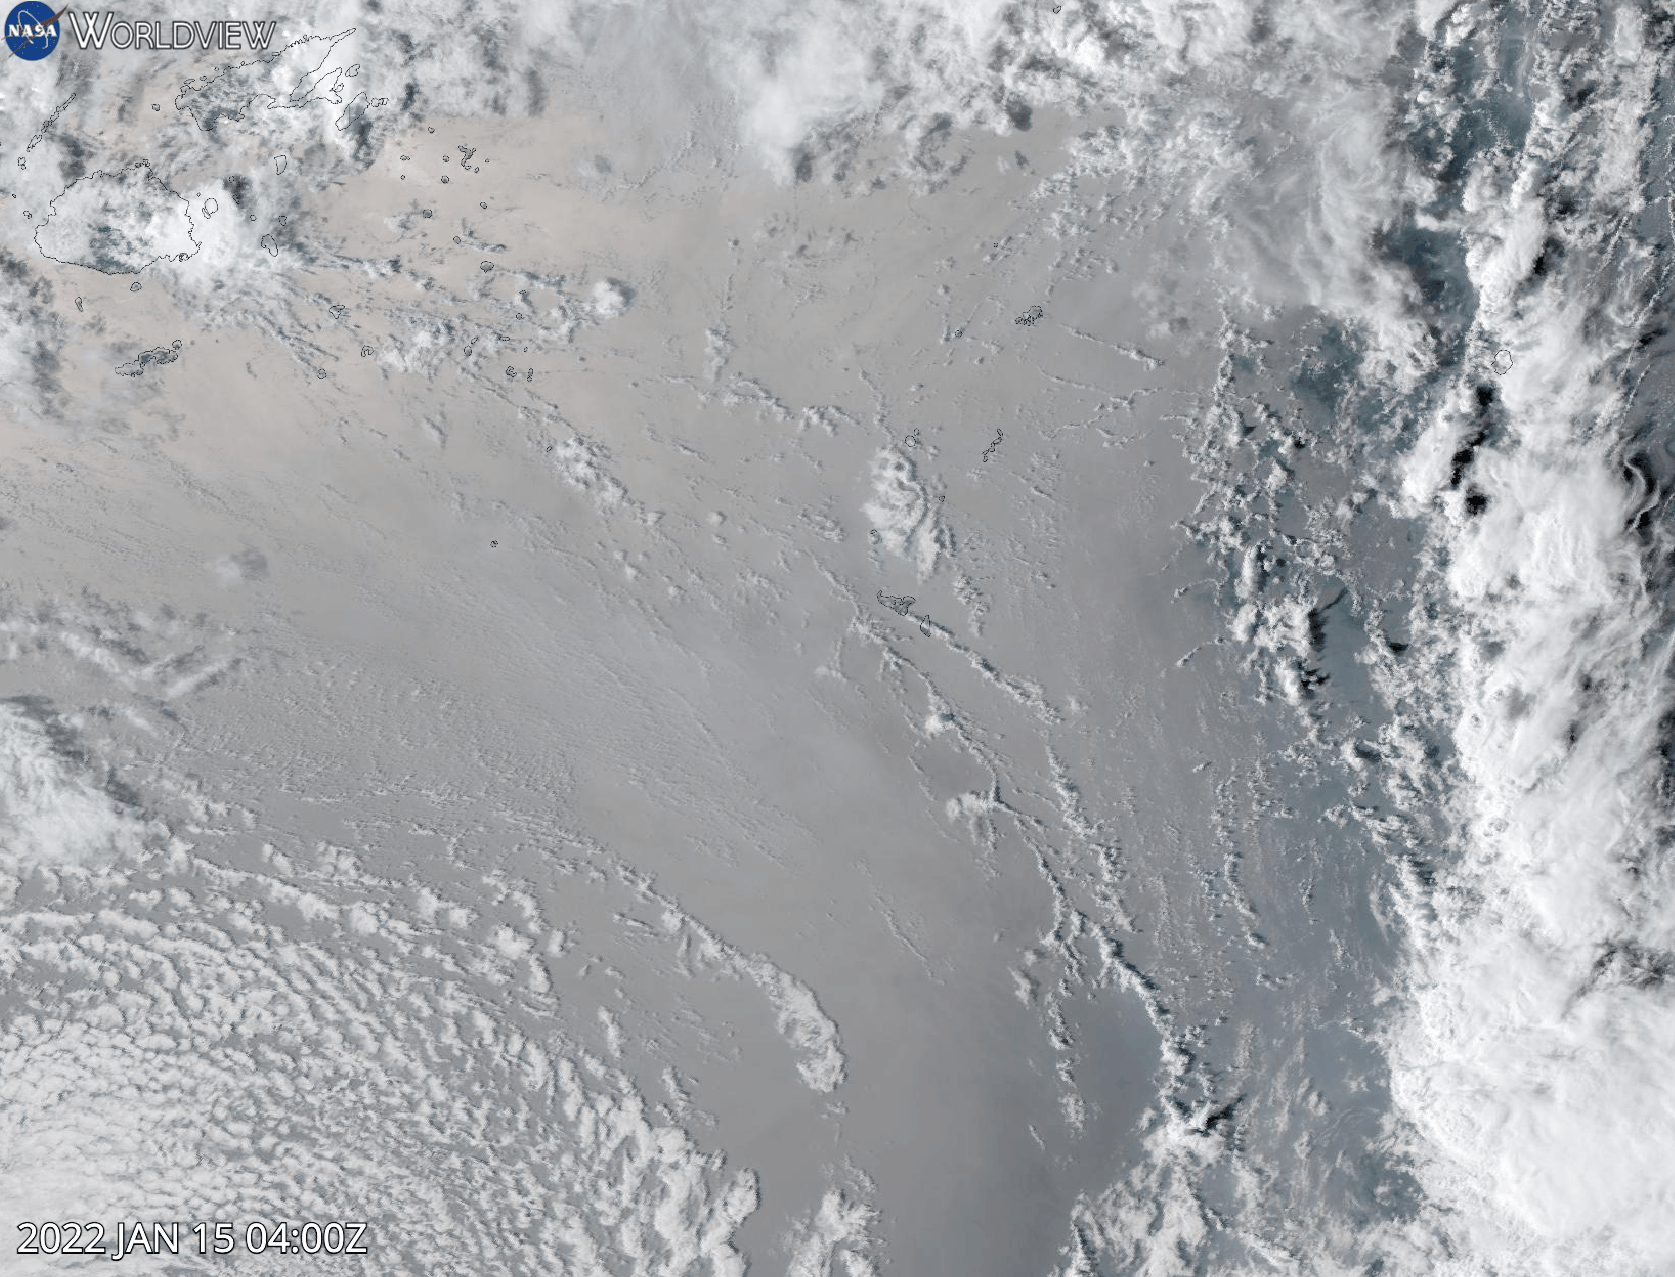 Animation of the eruption of the Hunga Tonga-Hunga Ha'apai volcano captured by the GOES-17 satellite. An aerial view of clouds swirl in the background while a large plume of ash and dust expands rapidly over the location of the volcano.